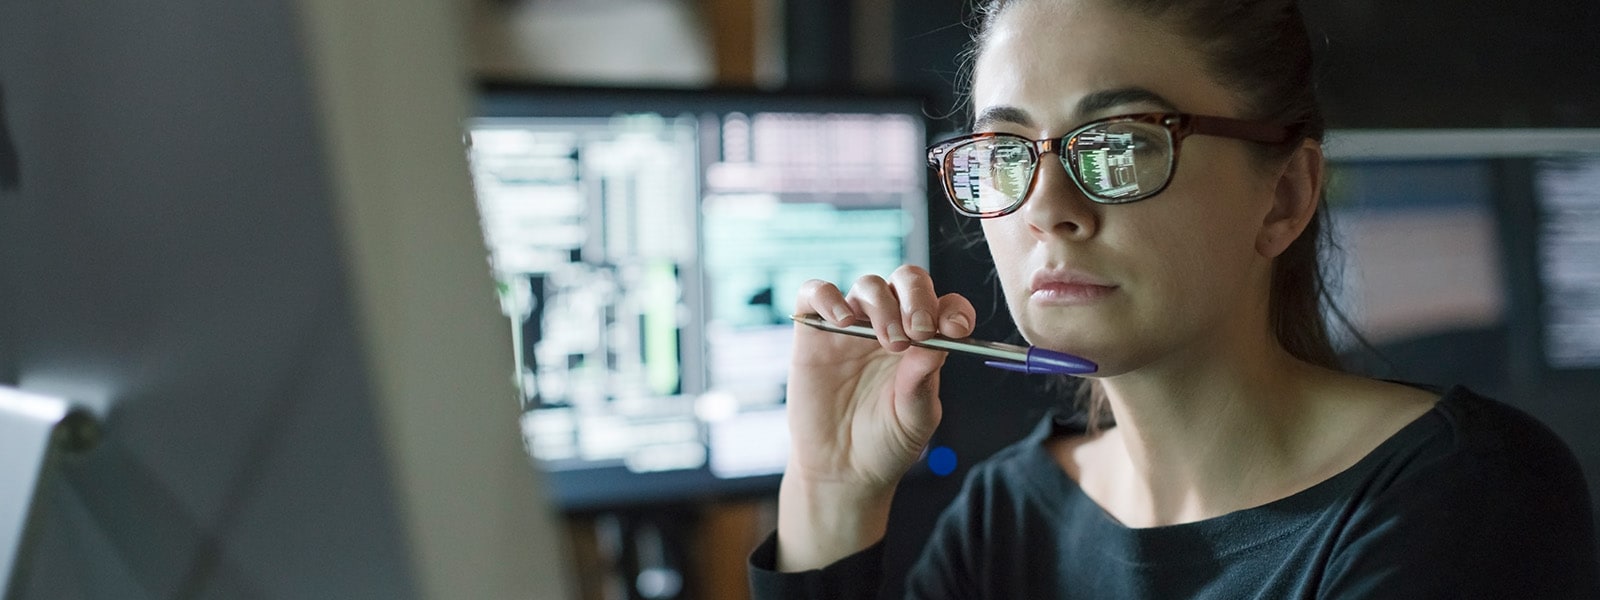 A contemplative woman in glasses holds a pen and gazes at a computer monitor, suggesting she is checking for spyware. 